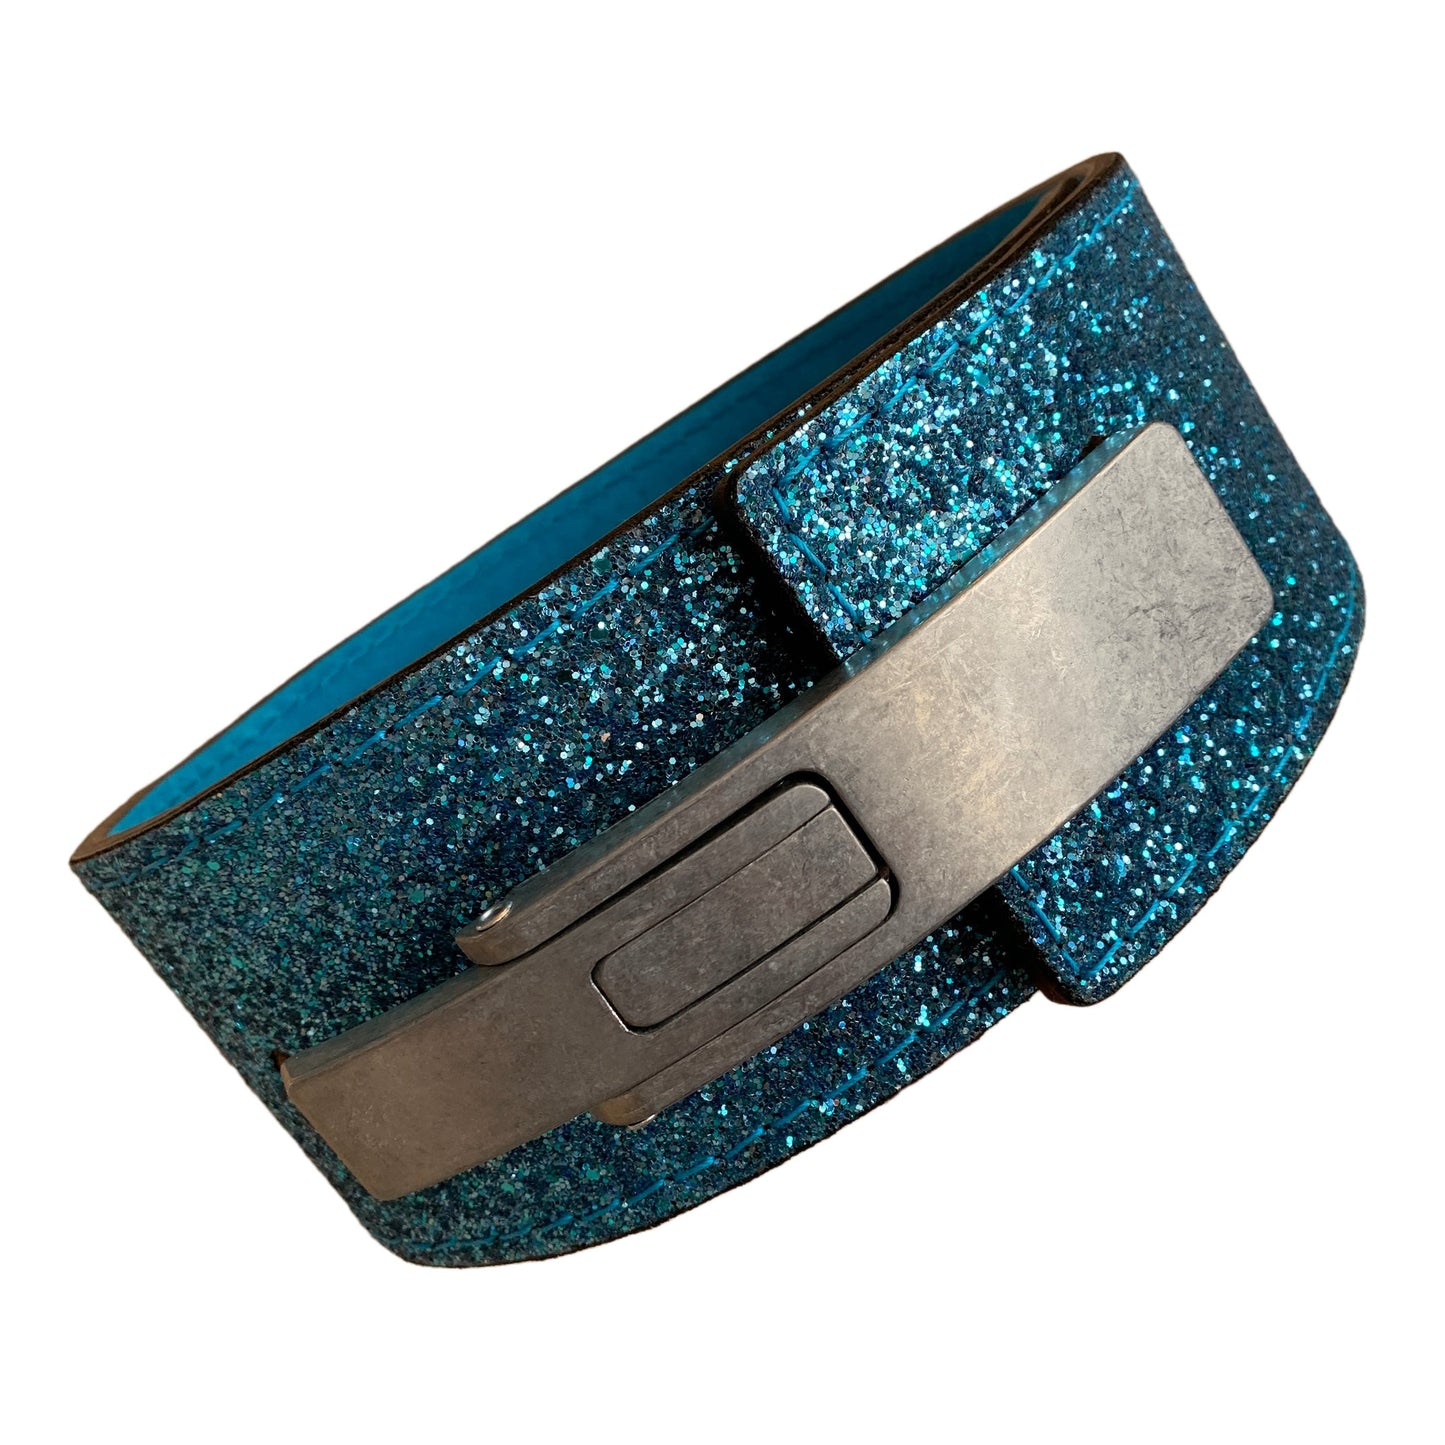 Pioneer Fitness Powerlifting Lever Belt – 13mm thick – 4" wide (Sparkle)